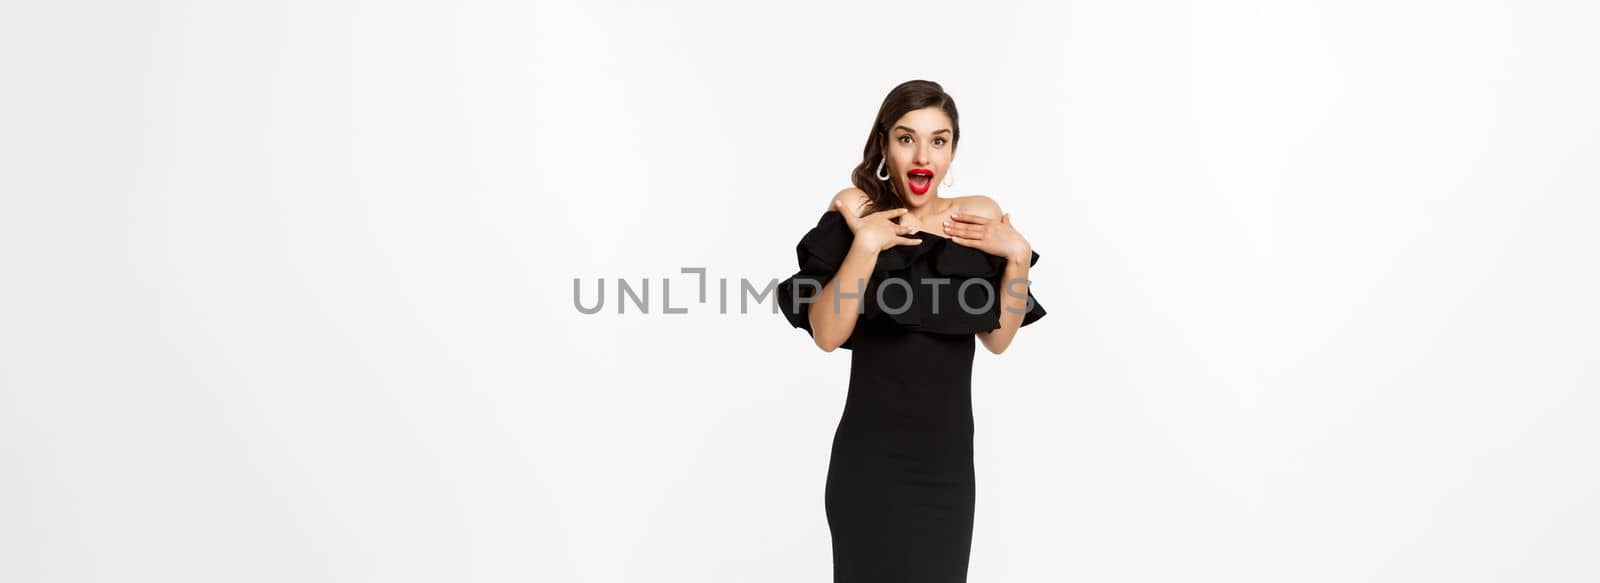 Full length view of woman in elegant dress and red lips, looking surprised, receive gifts on christmas holidays, standing with presents over white background.